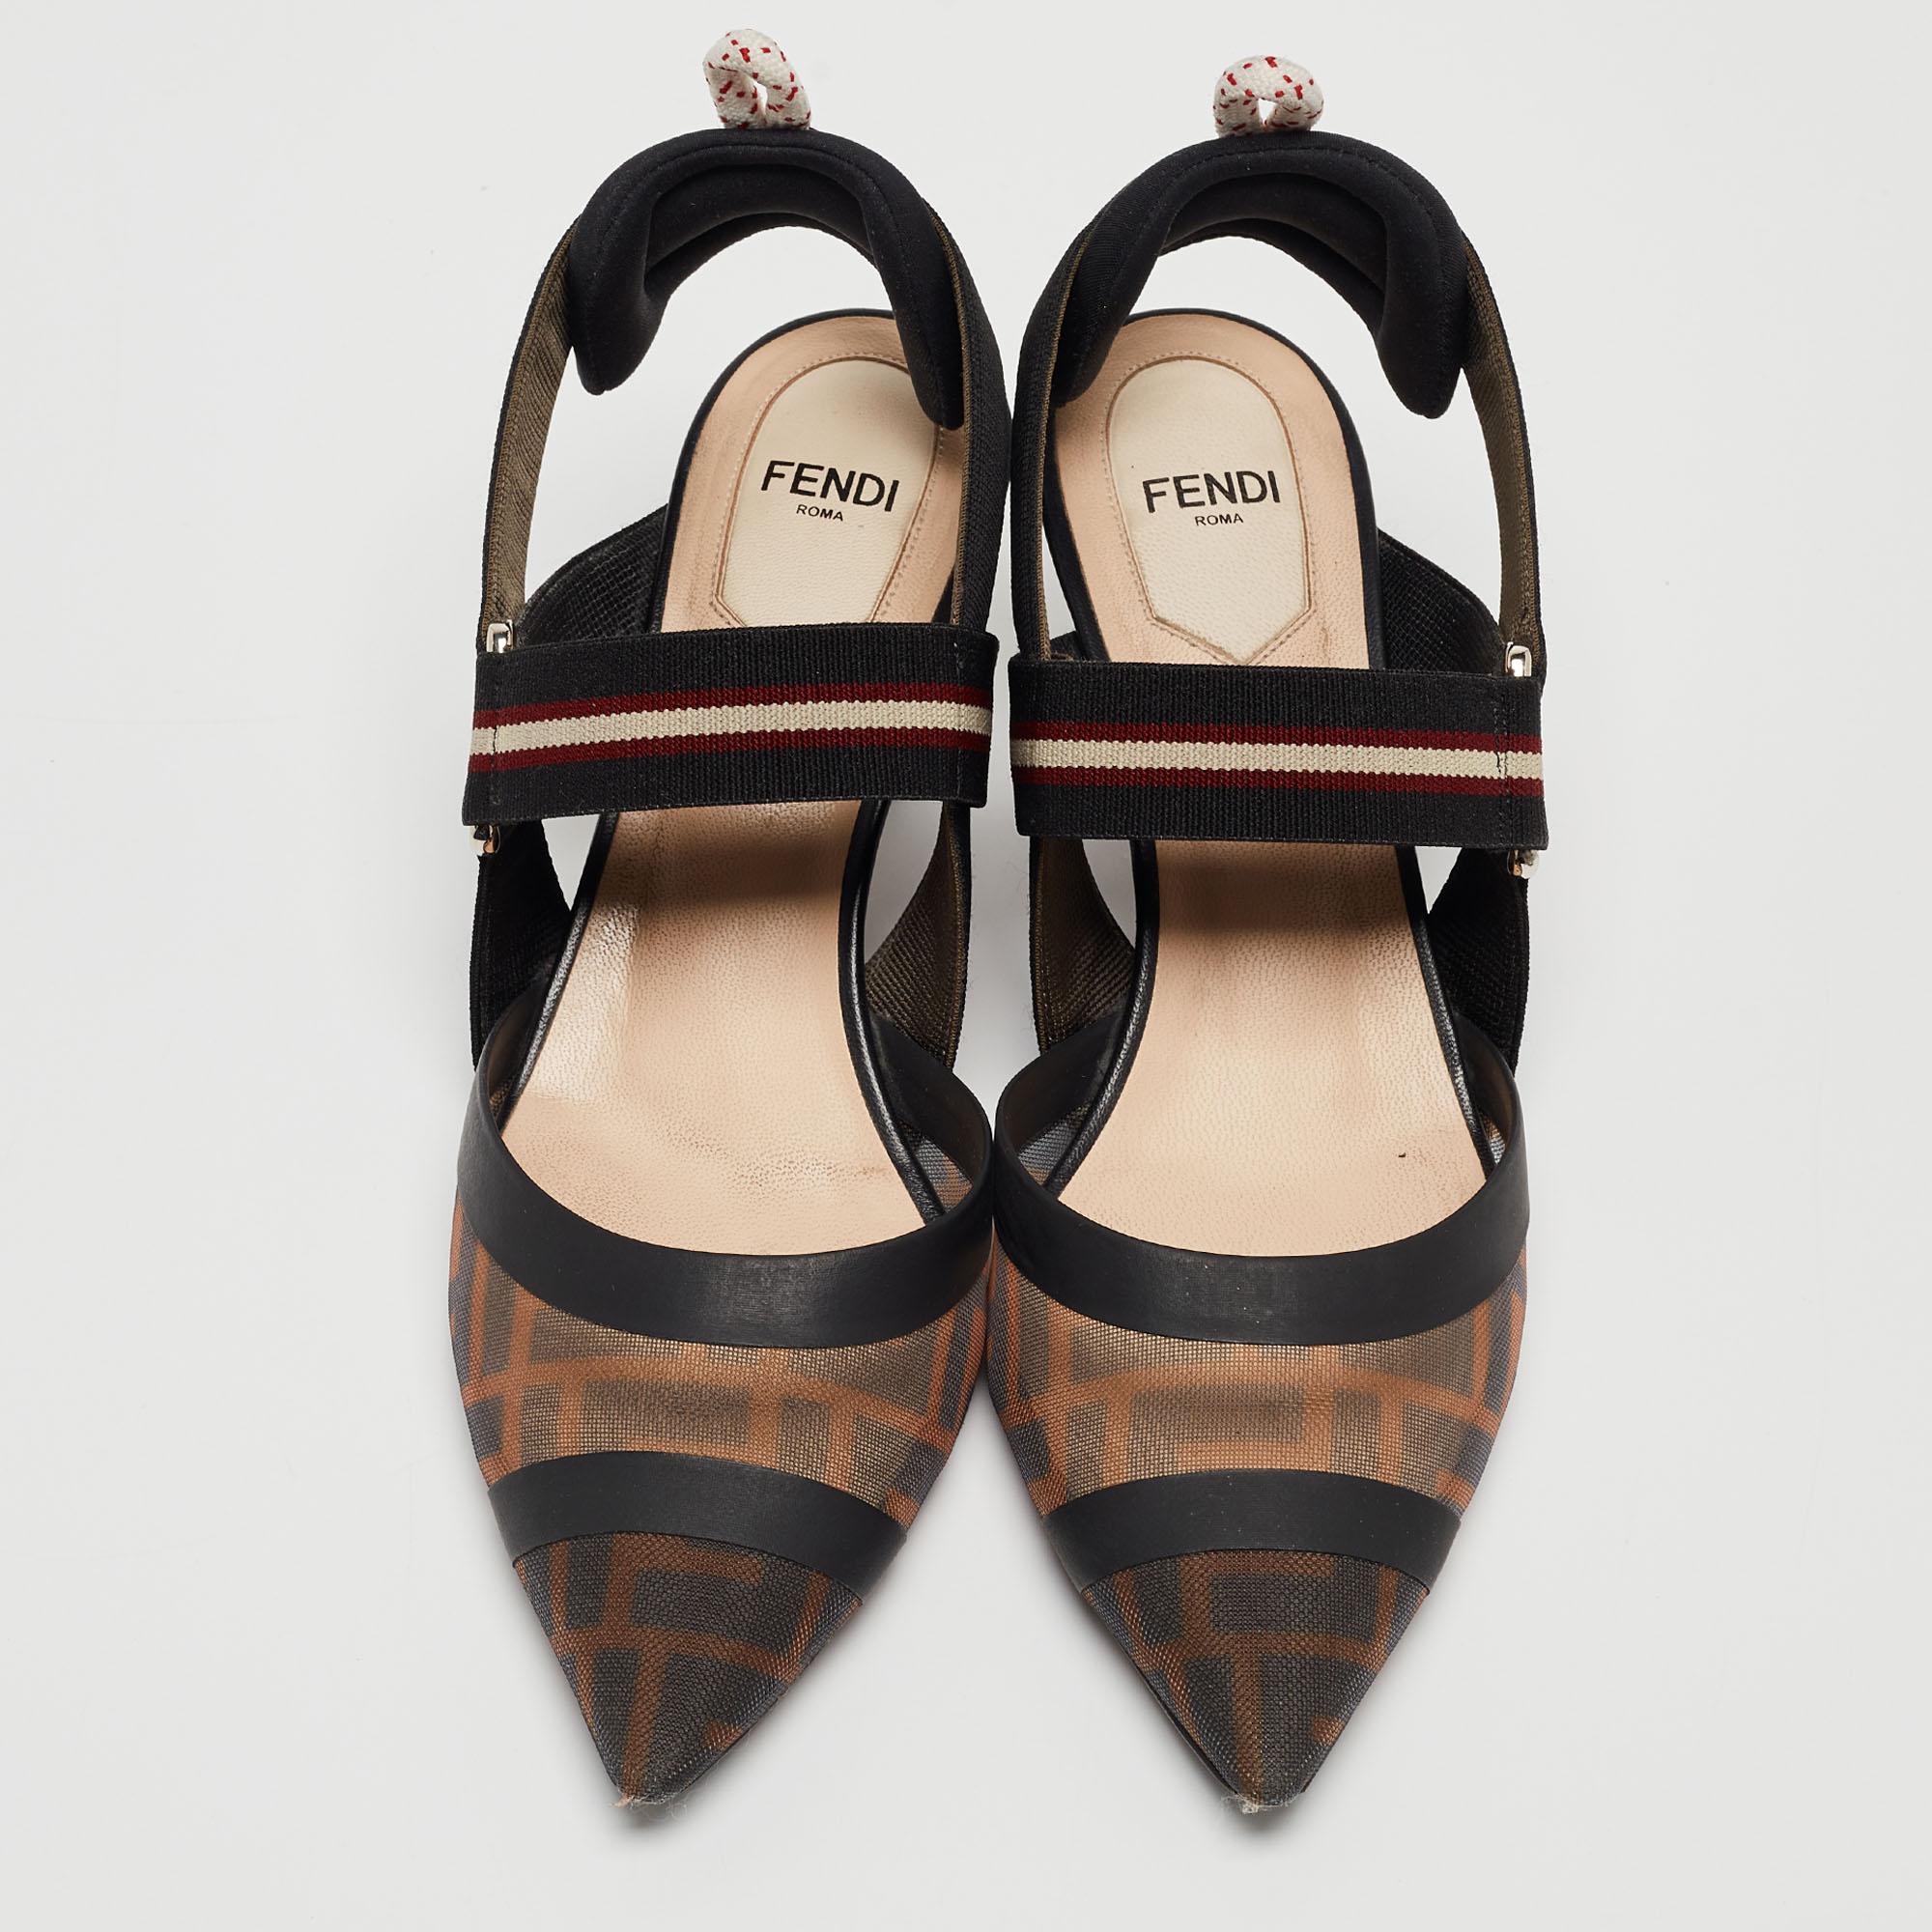 Make a statement with these Fendi pumps for women. Impeccably crafted, these chic heels offer both fashion and comfort, elevating your look with each graceful step.

Includes: Original Box

